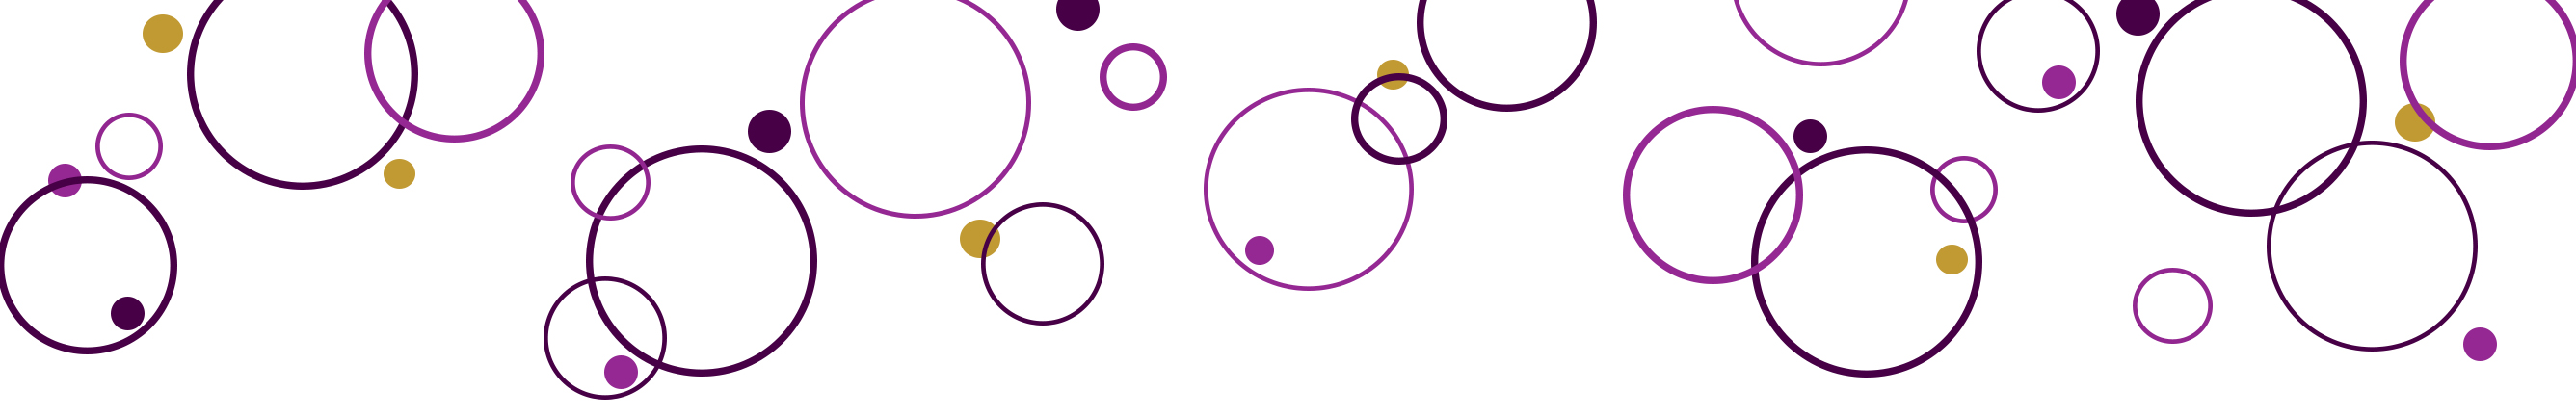 Purple and violet overlapping circles